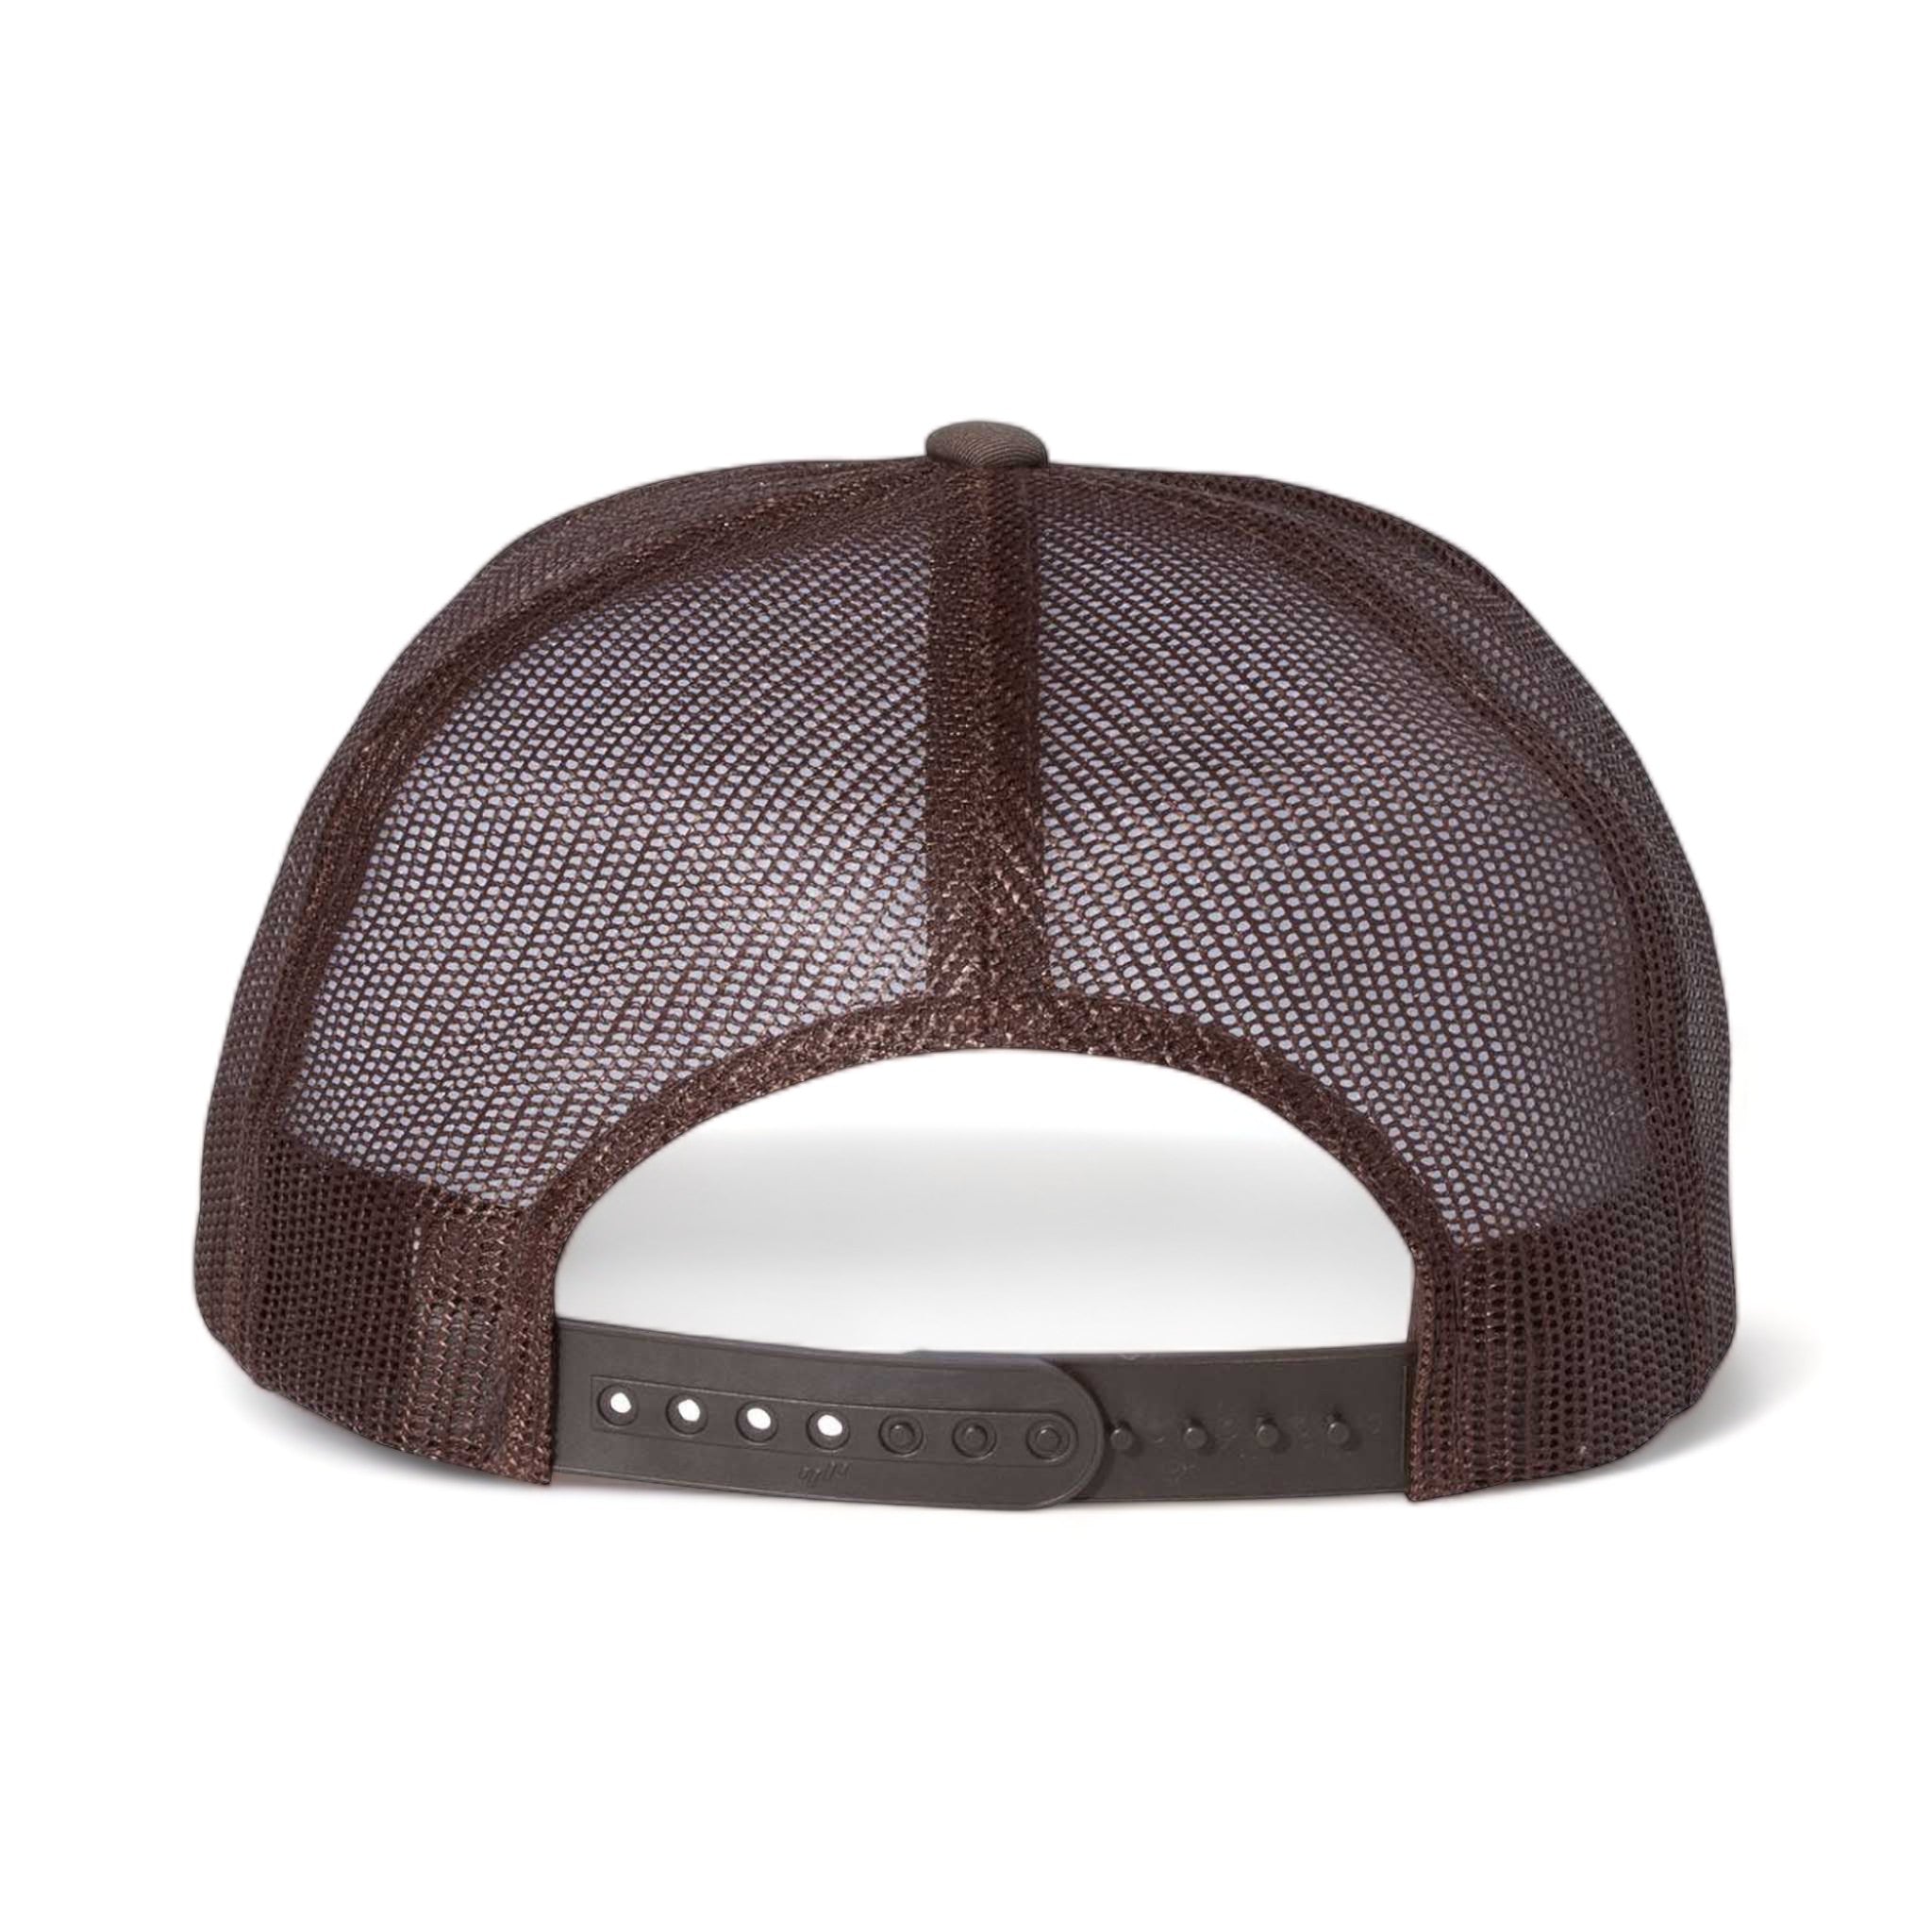 Back view of YP Classics 6006 custom hat in brown, white and brown